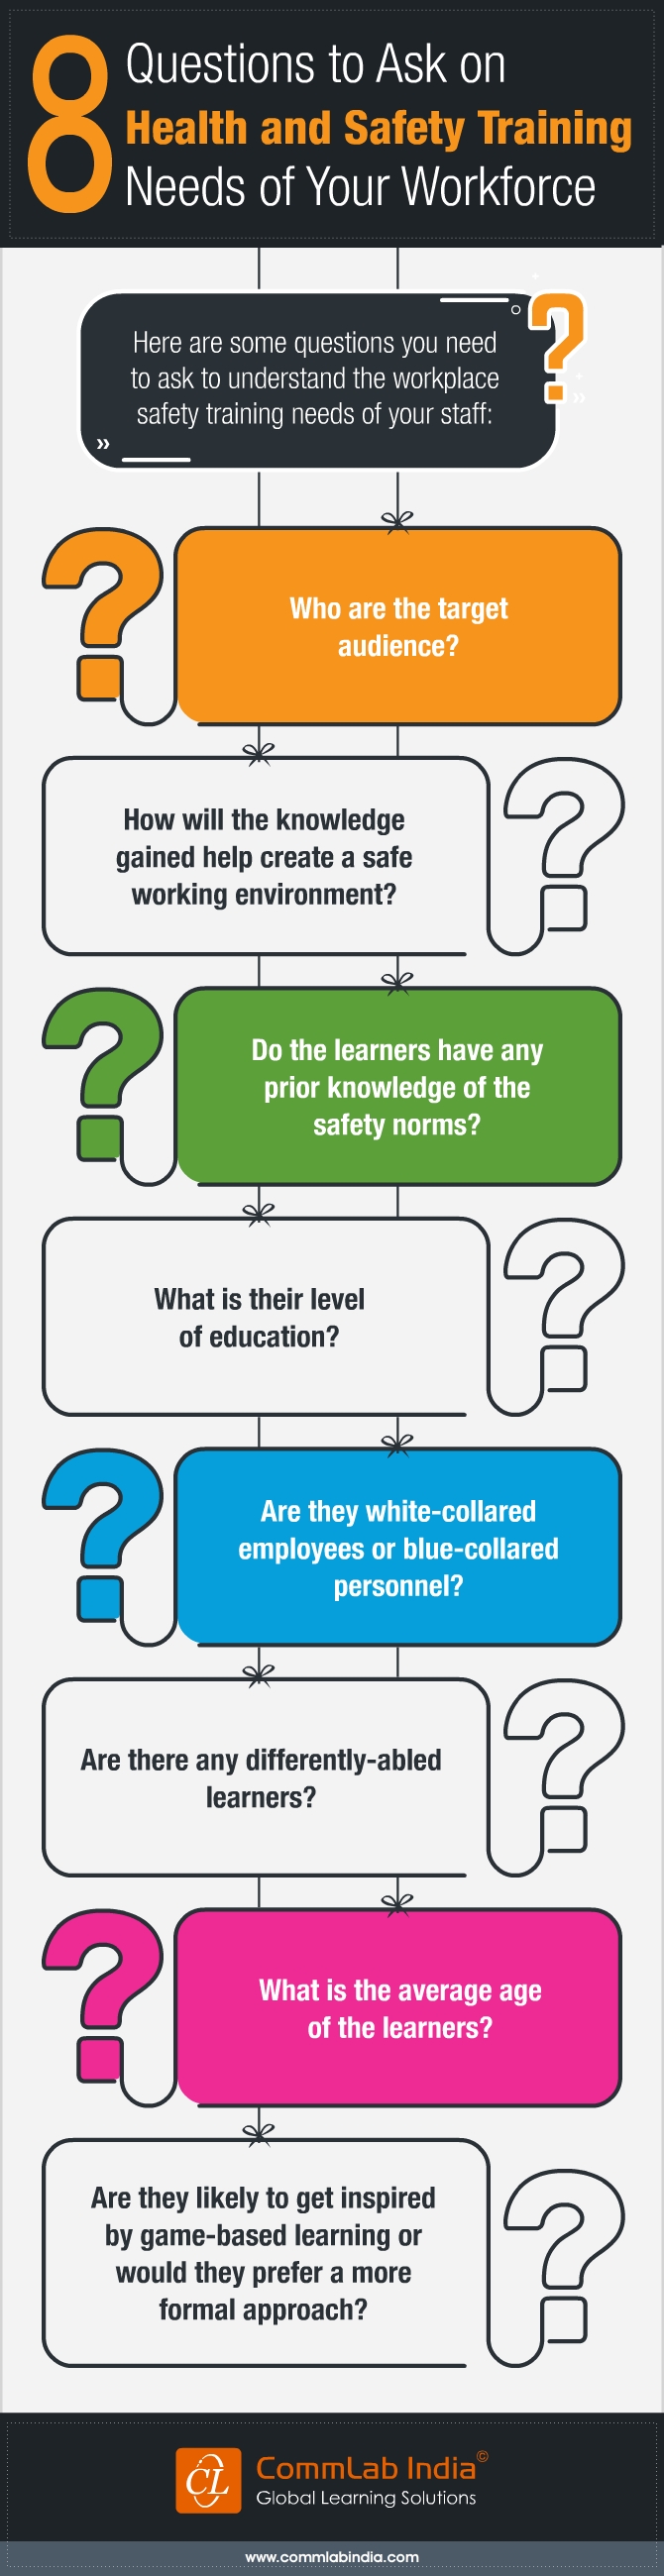 8 Questions to Ask On the Health and Safety Training Needs of Your Workforce [Infographic]